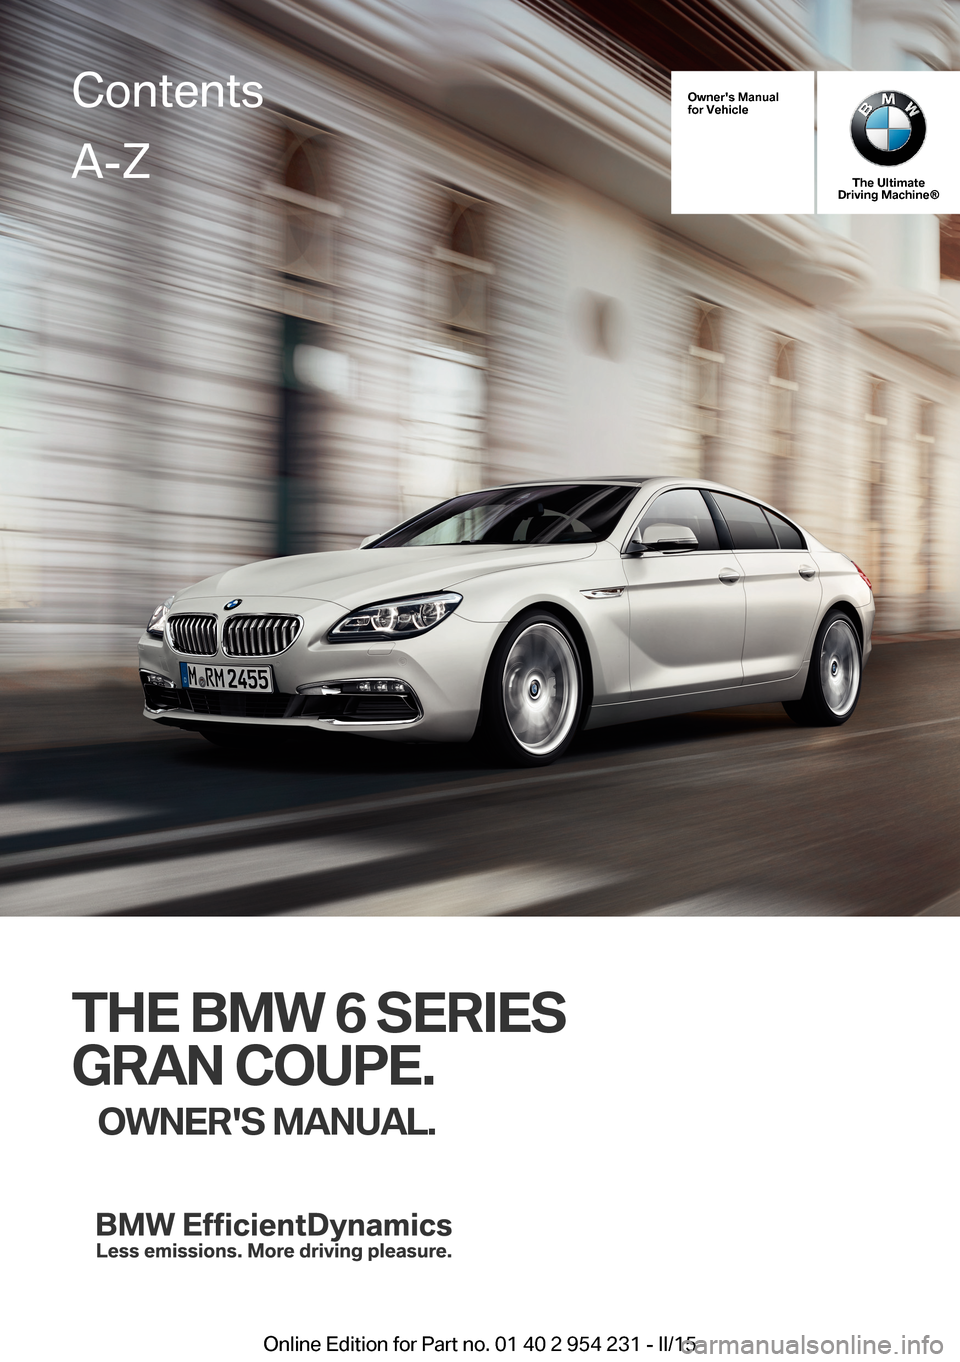 BMW 6 SERIES GRAN COUPE 2016 F06 Owners Manual Owners Manualfor Vehicle
The UltimateDriving Machine®
THE BMW 6 SERIES
GRAN COUPE.
OWNERS MANUAL.
ContentsA-Z
Online Edition for Part no. 01 40 2 954 231 - II/15   